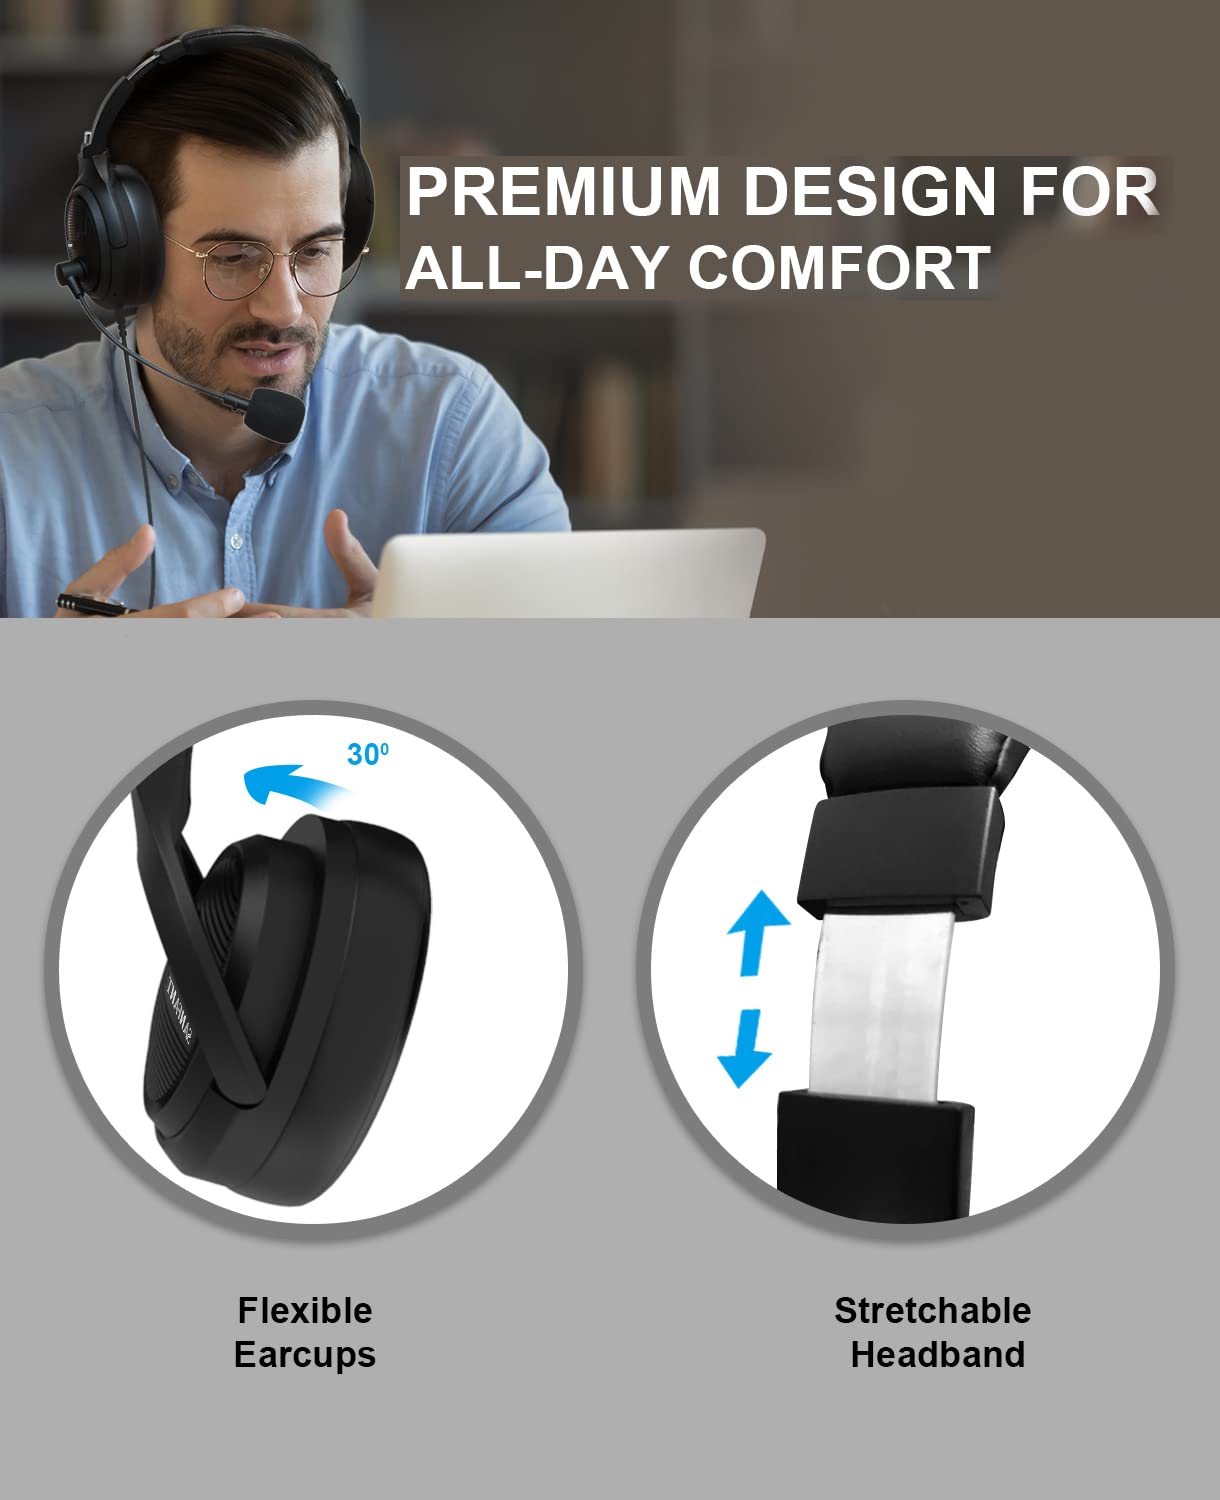 USB Headset/3.5mm PC Headphones with Microphone Noise Cancelling, Flexible Over-Ear Earcups and Rotatable Boom Mic, Wired Computer Headset, Comfort Office Headset for Laptop/Call Center/Cell Phone